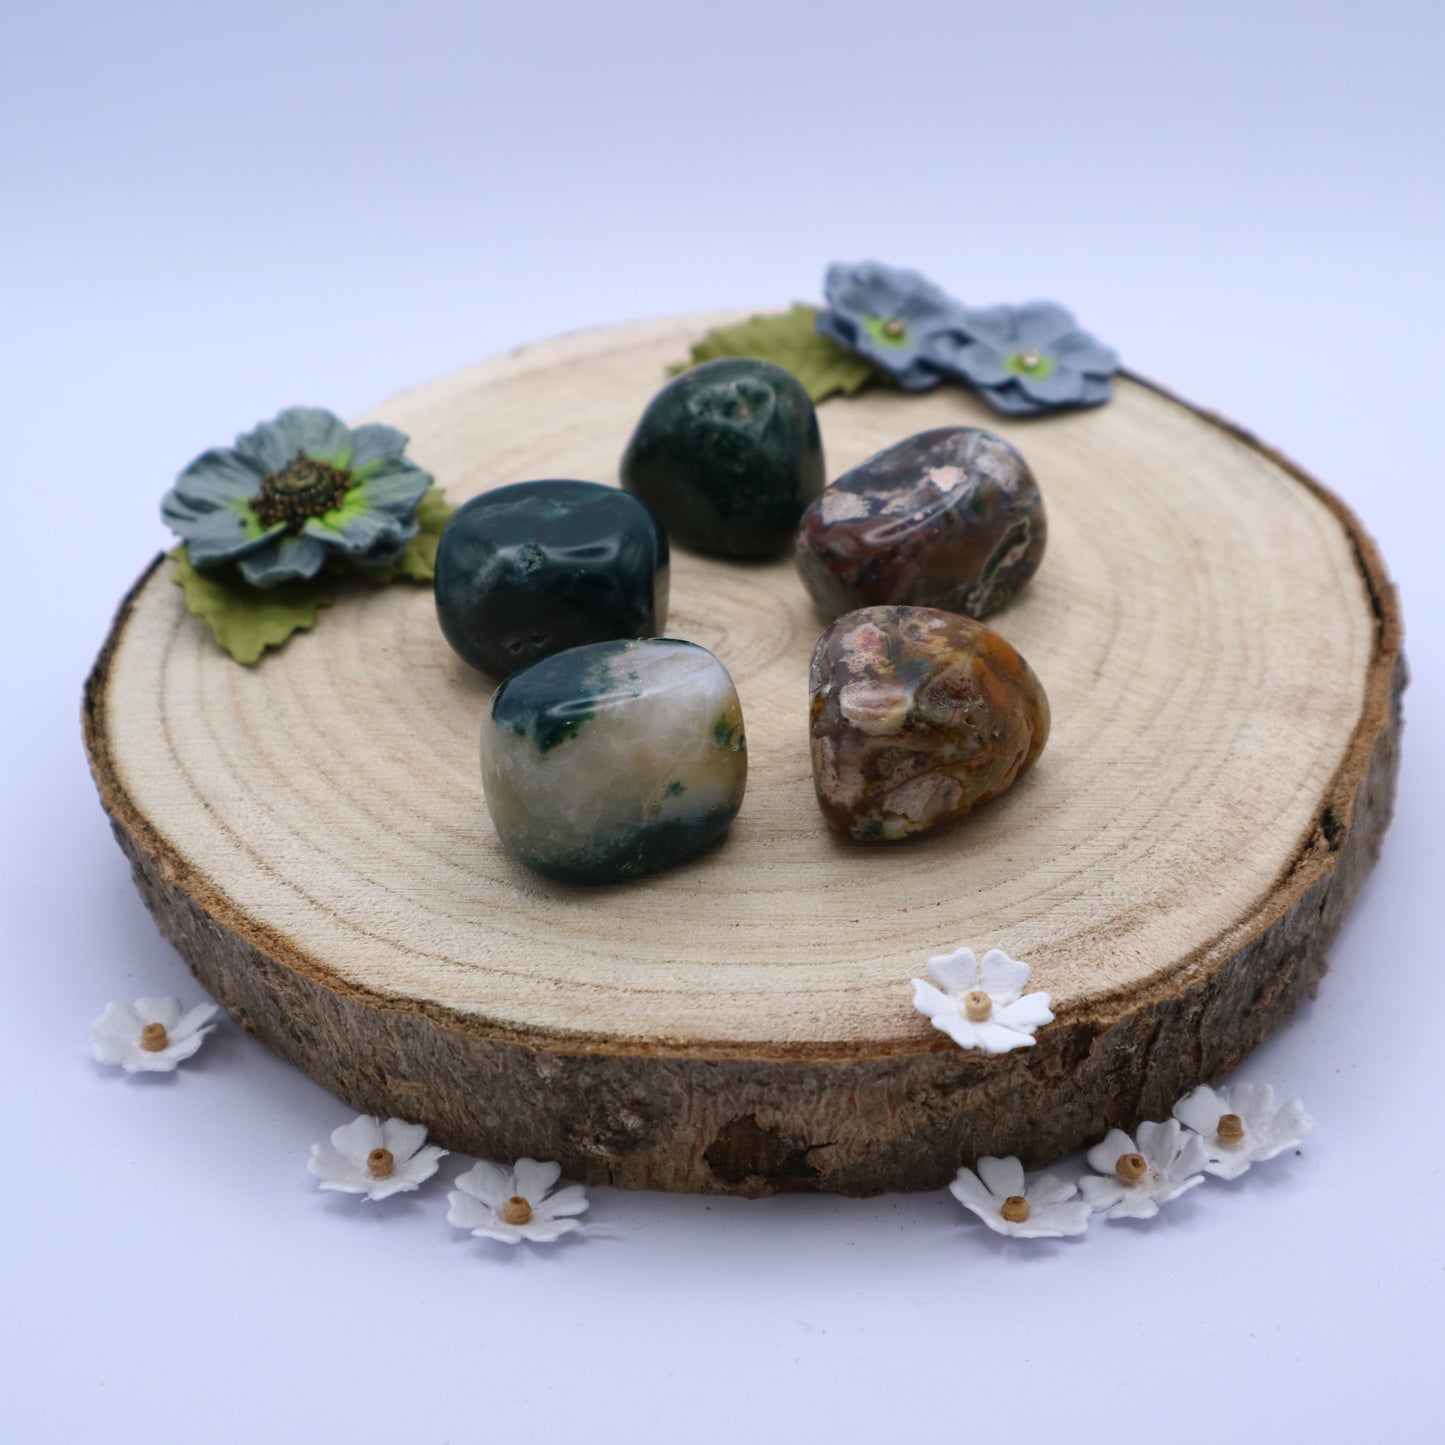 Five pieces of Ocean Jasper crystals displayed on a piece of wood surrounded by flowers